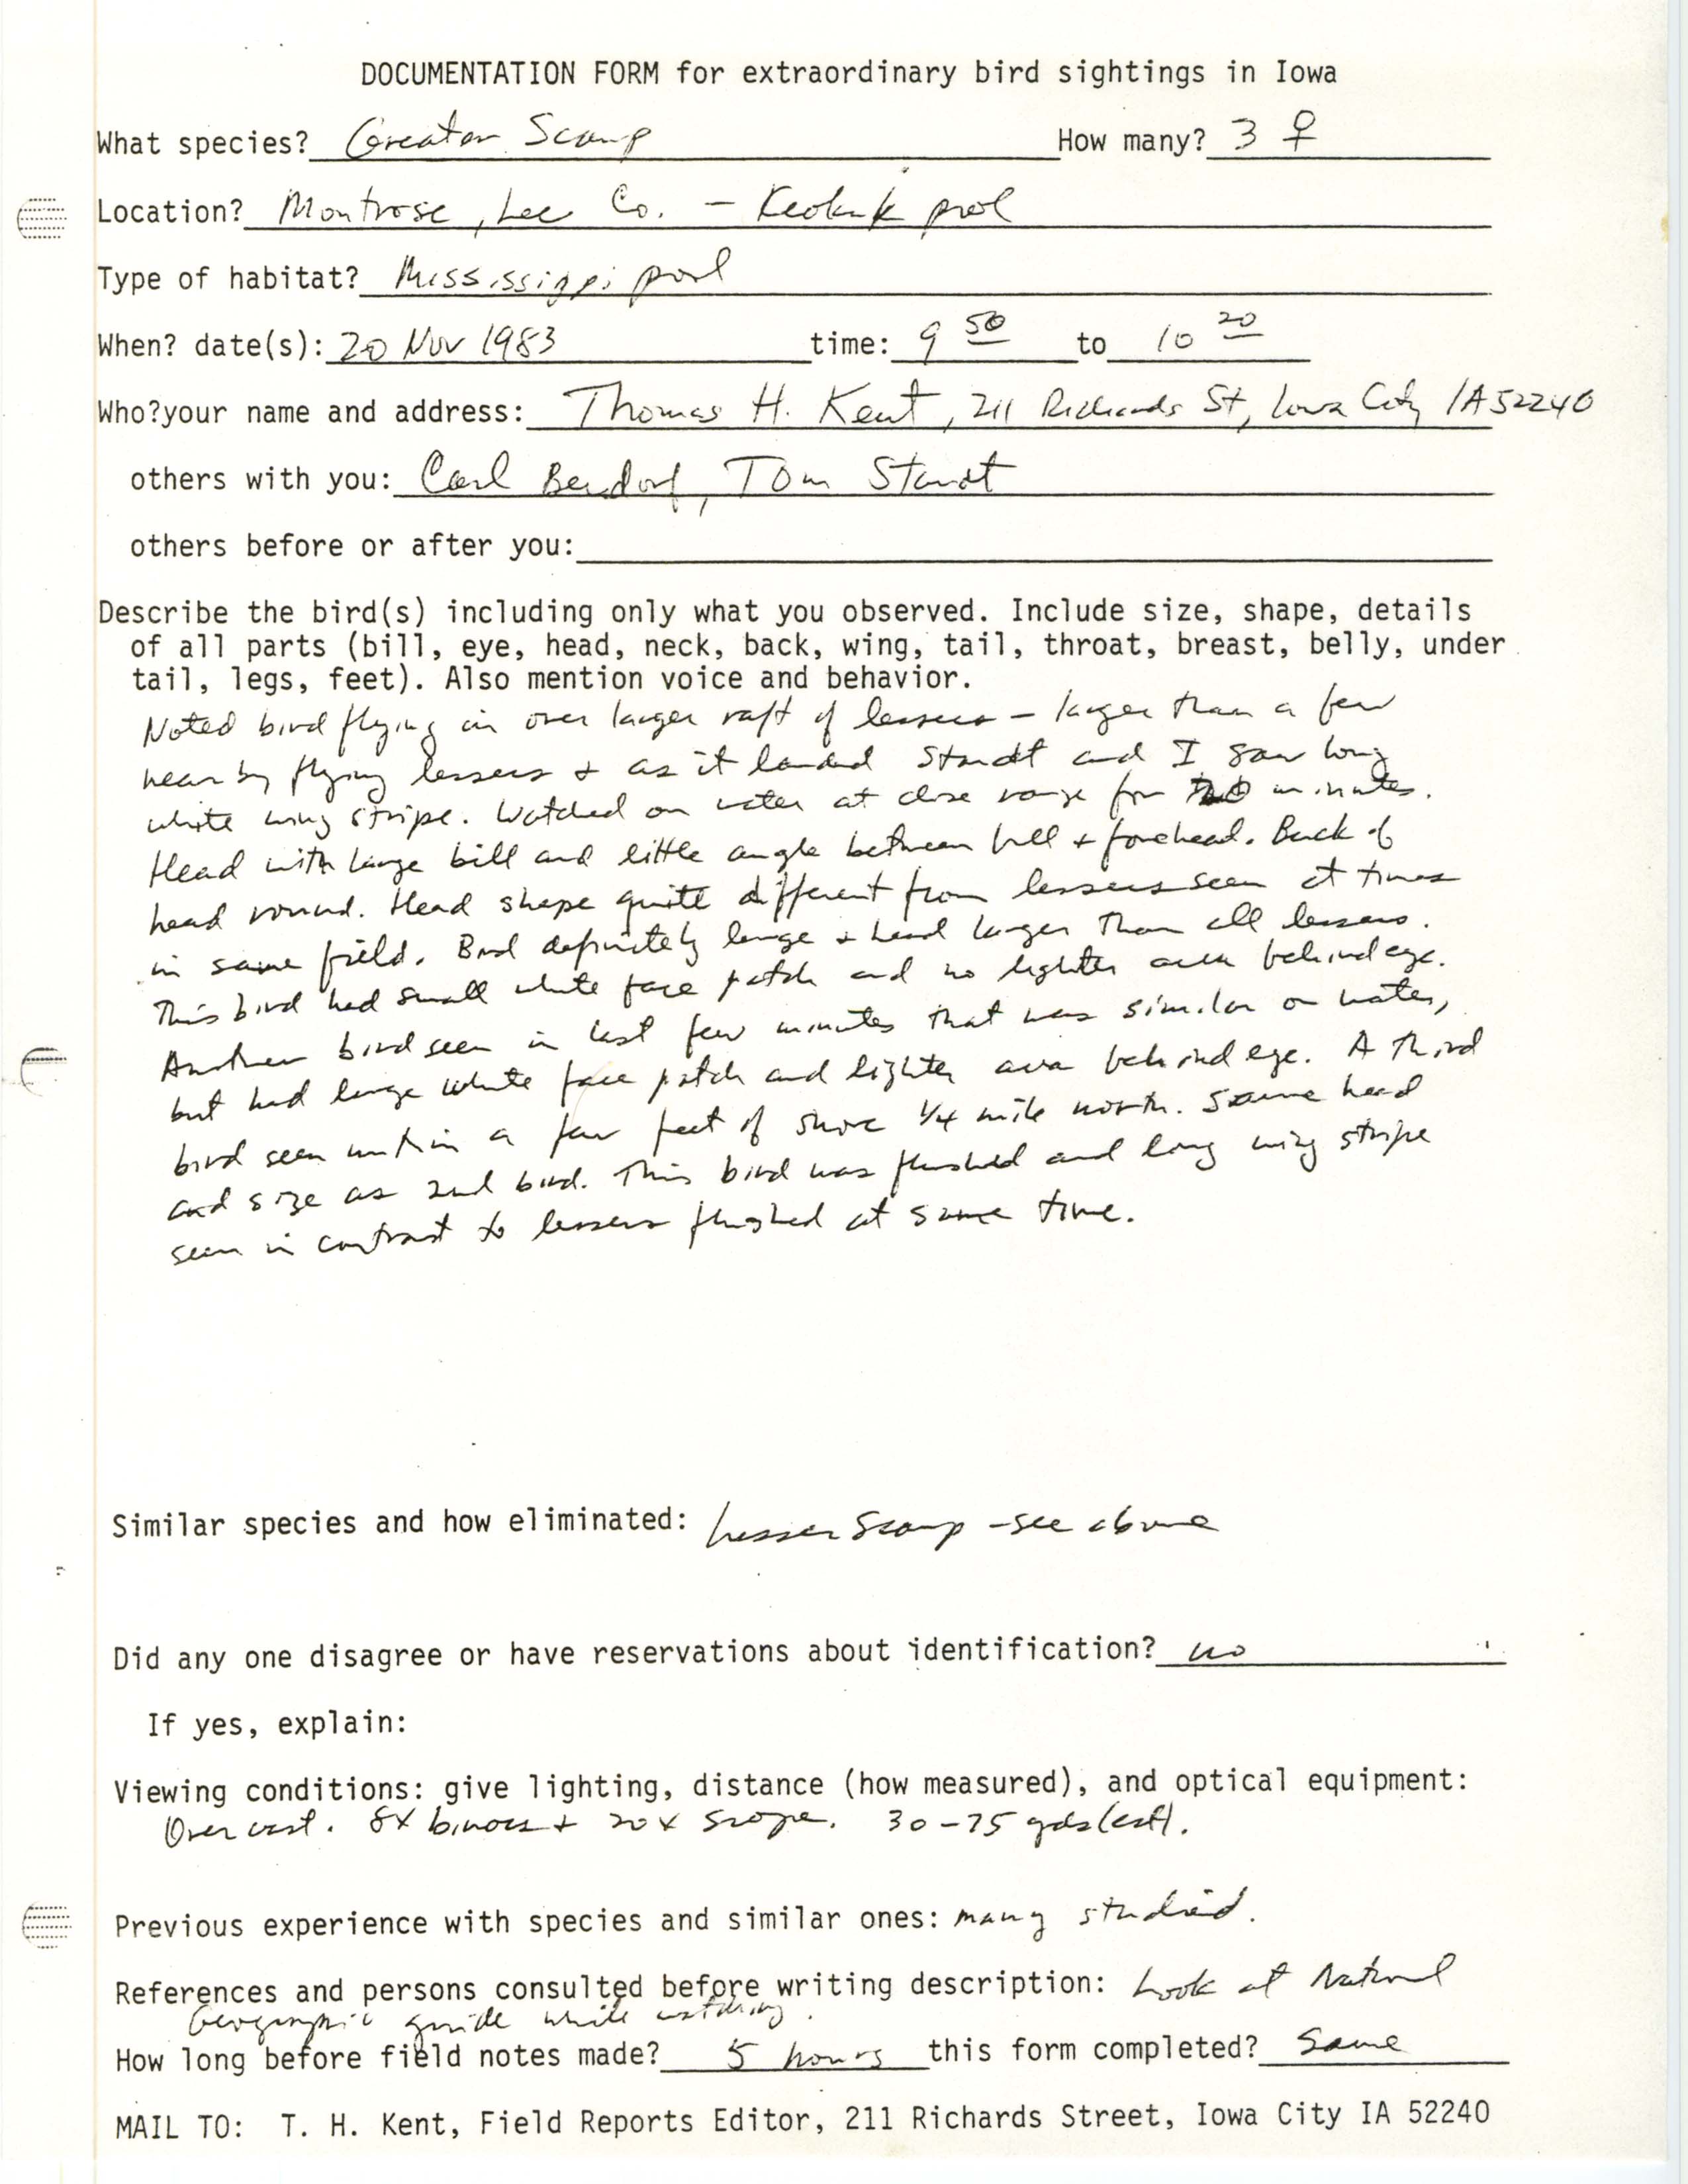 Rare bird documentation form for Greater Scaup at Montrose, 1983